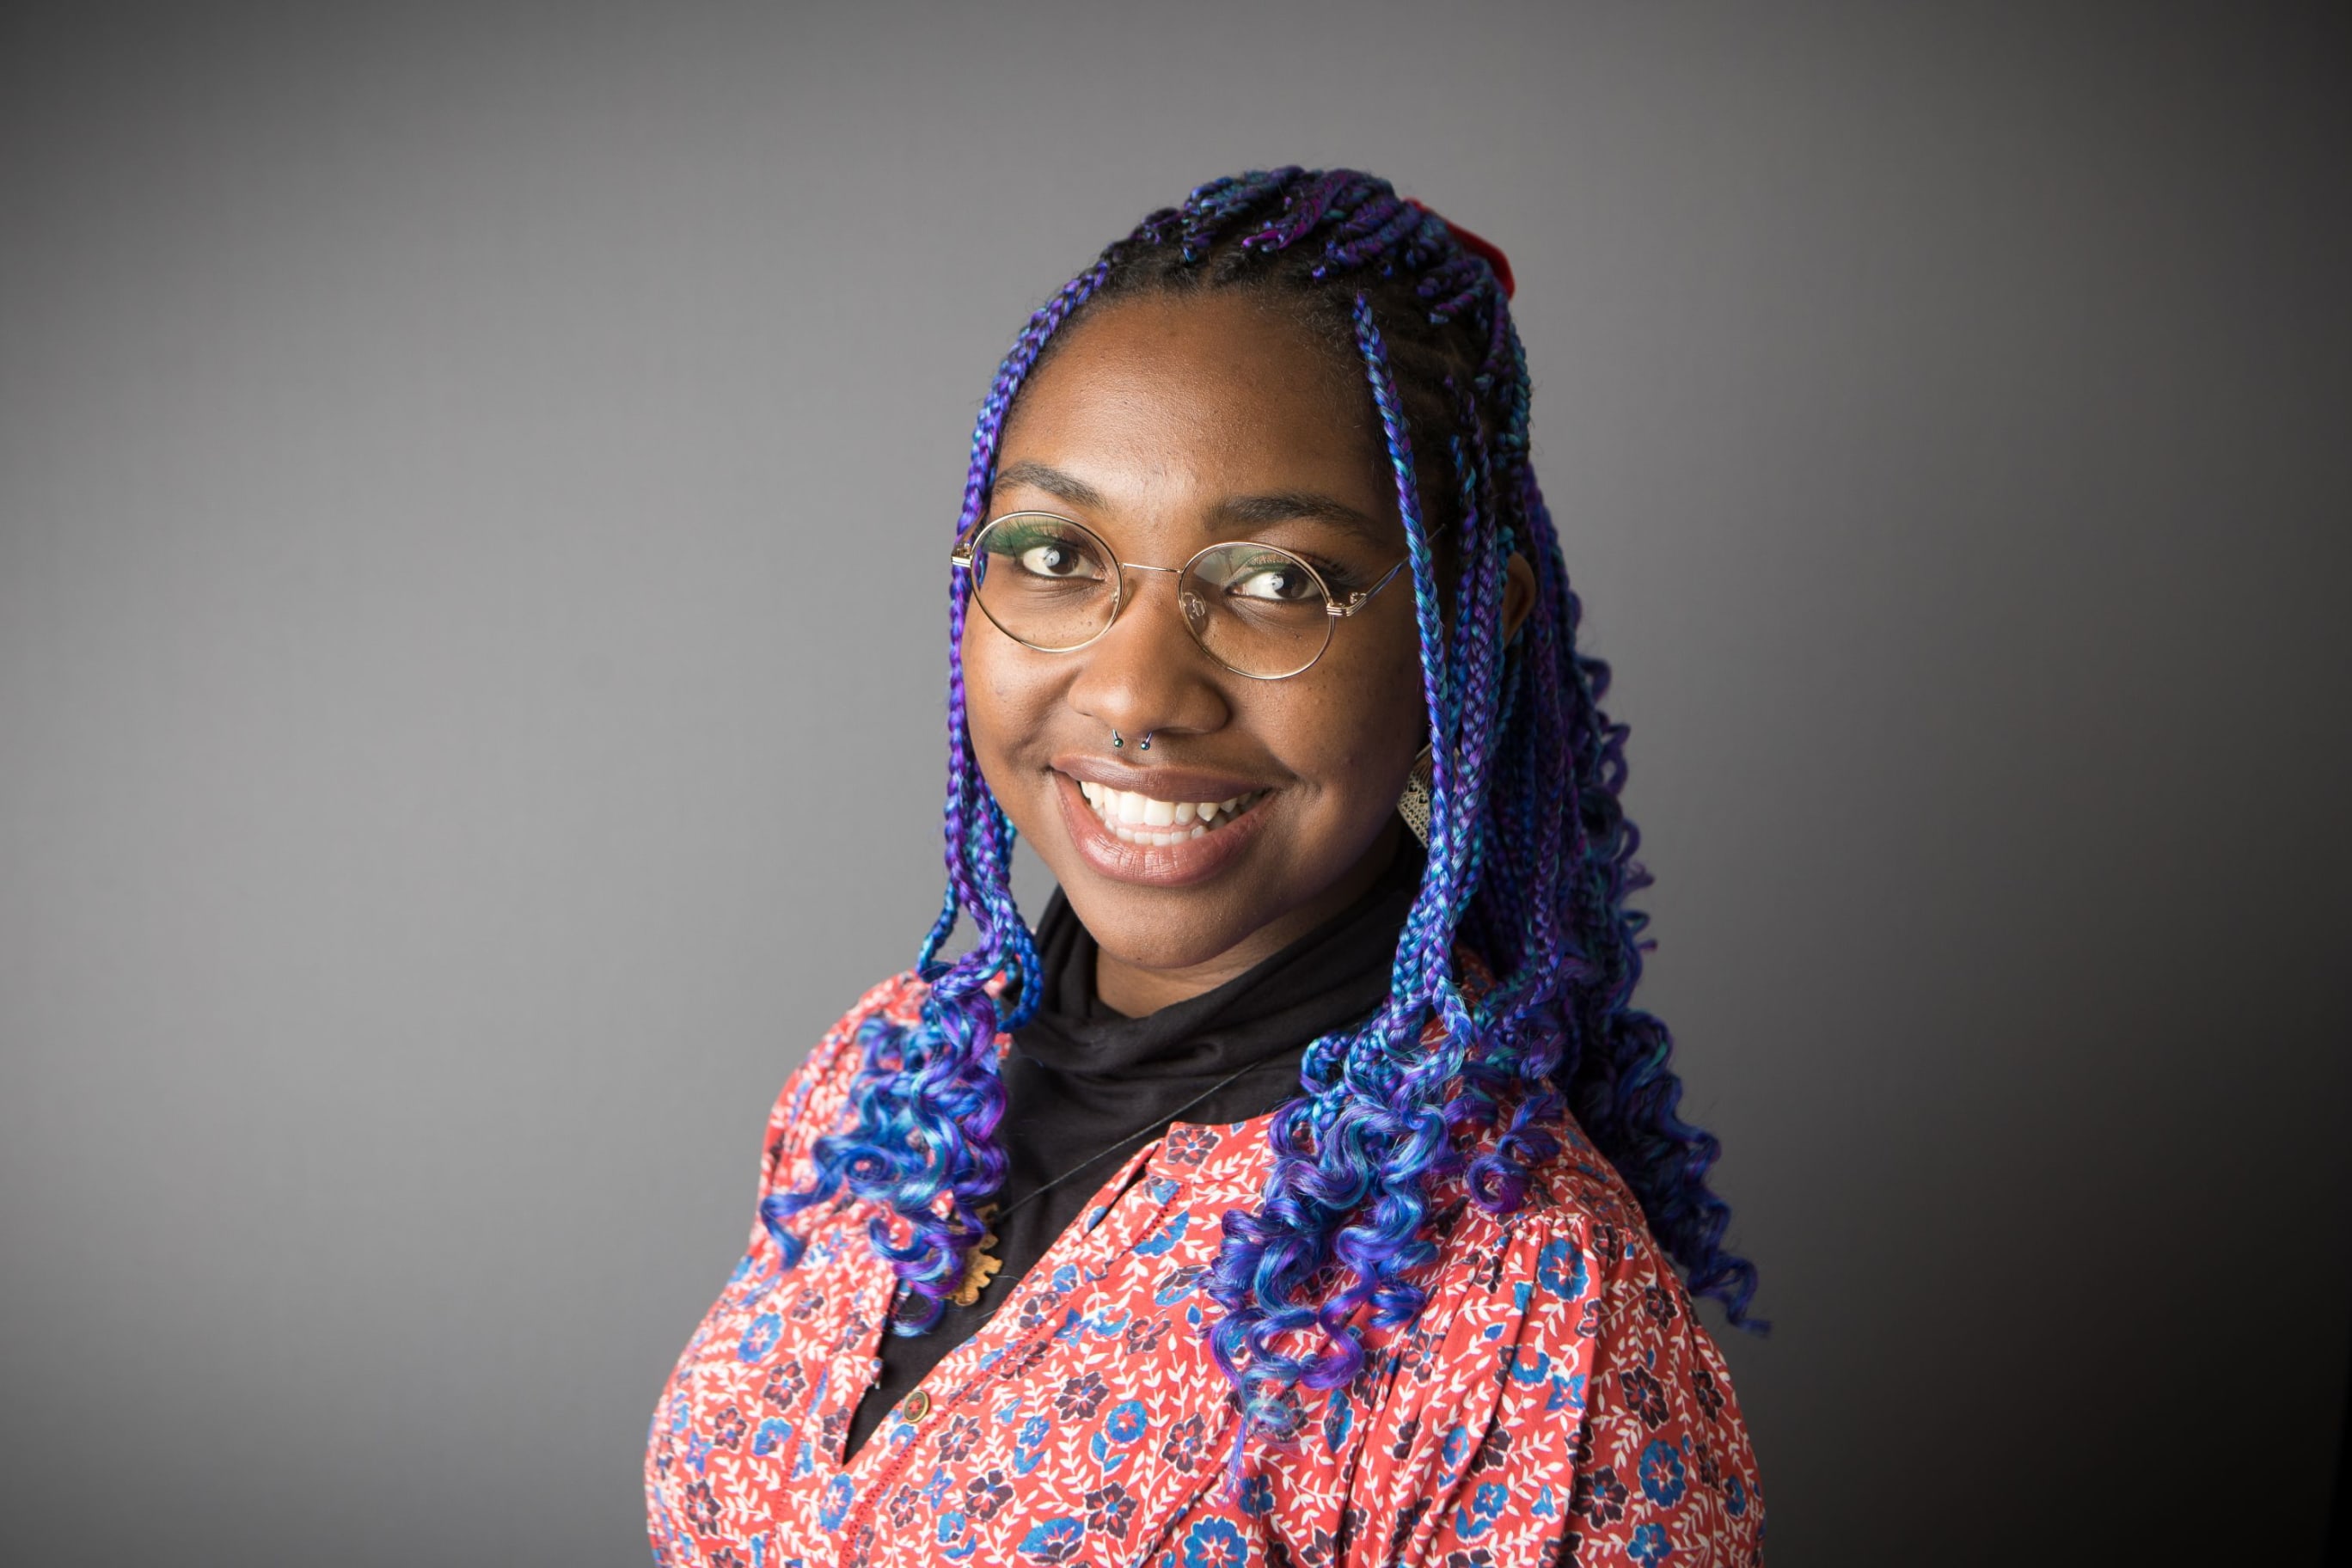 Headshot of Millicent, a black woman with long blue and purple curly braids, glasses and a patterned top